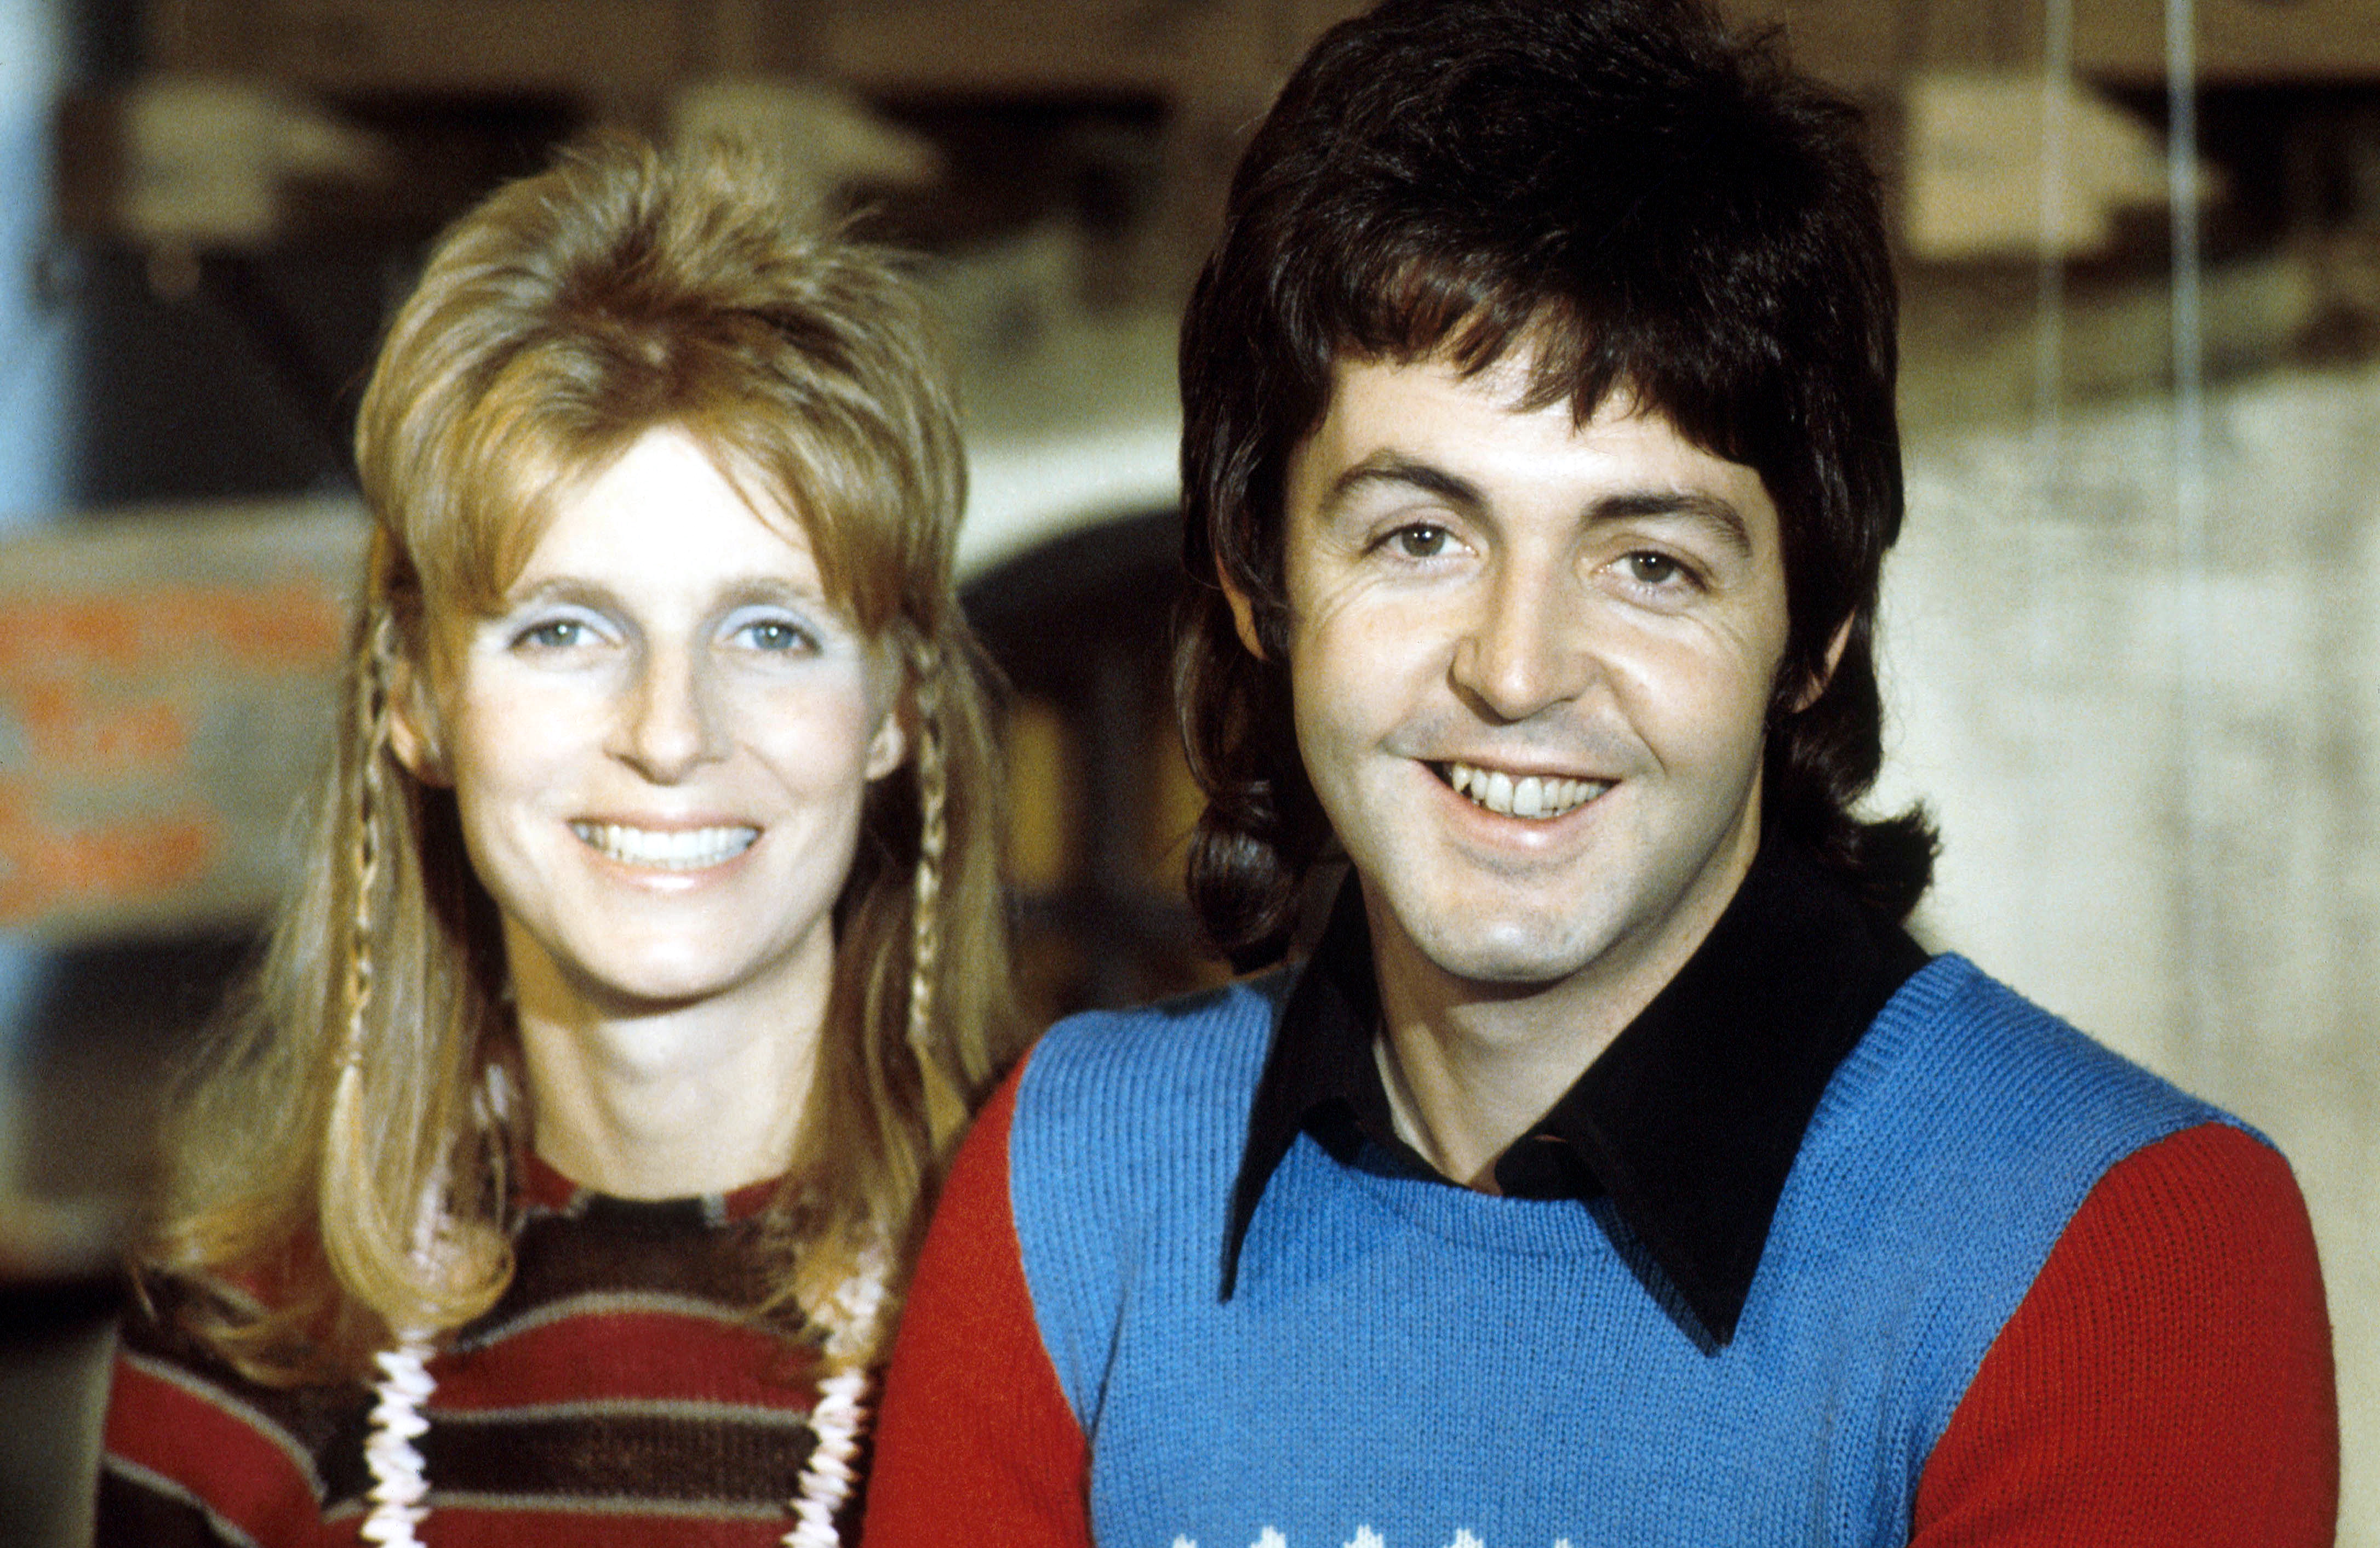 Linda Eastman and Paul McCartney pose for a portrait in 1973 | Source: Getty Images